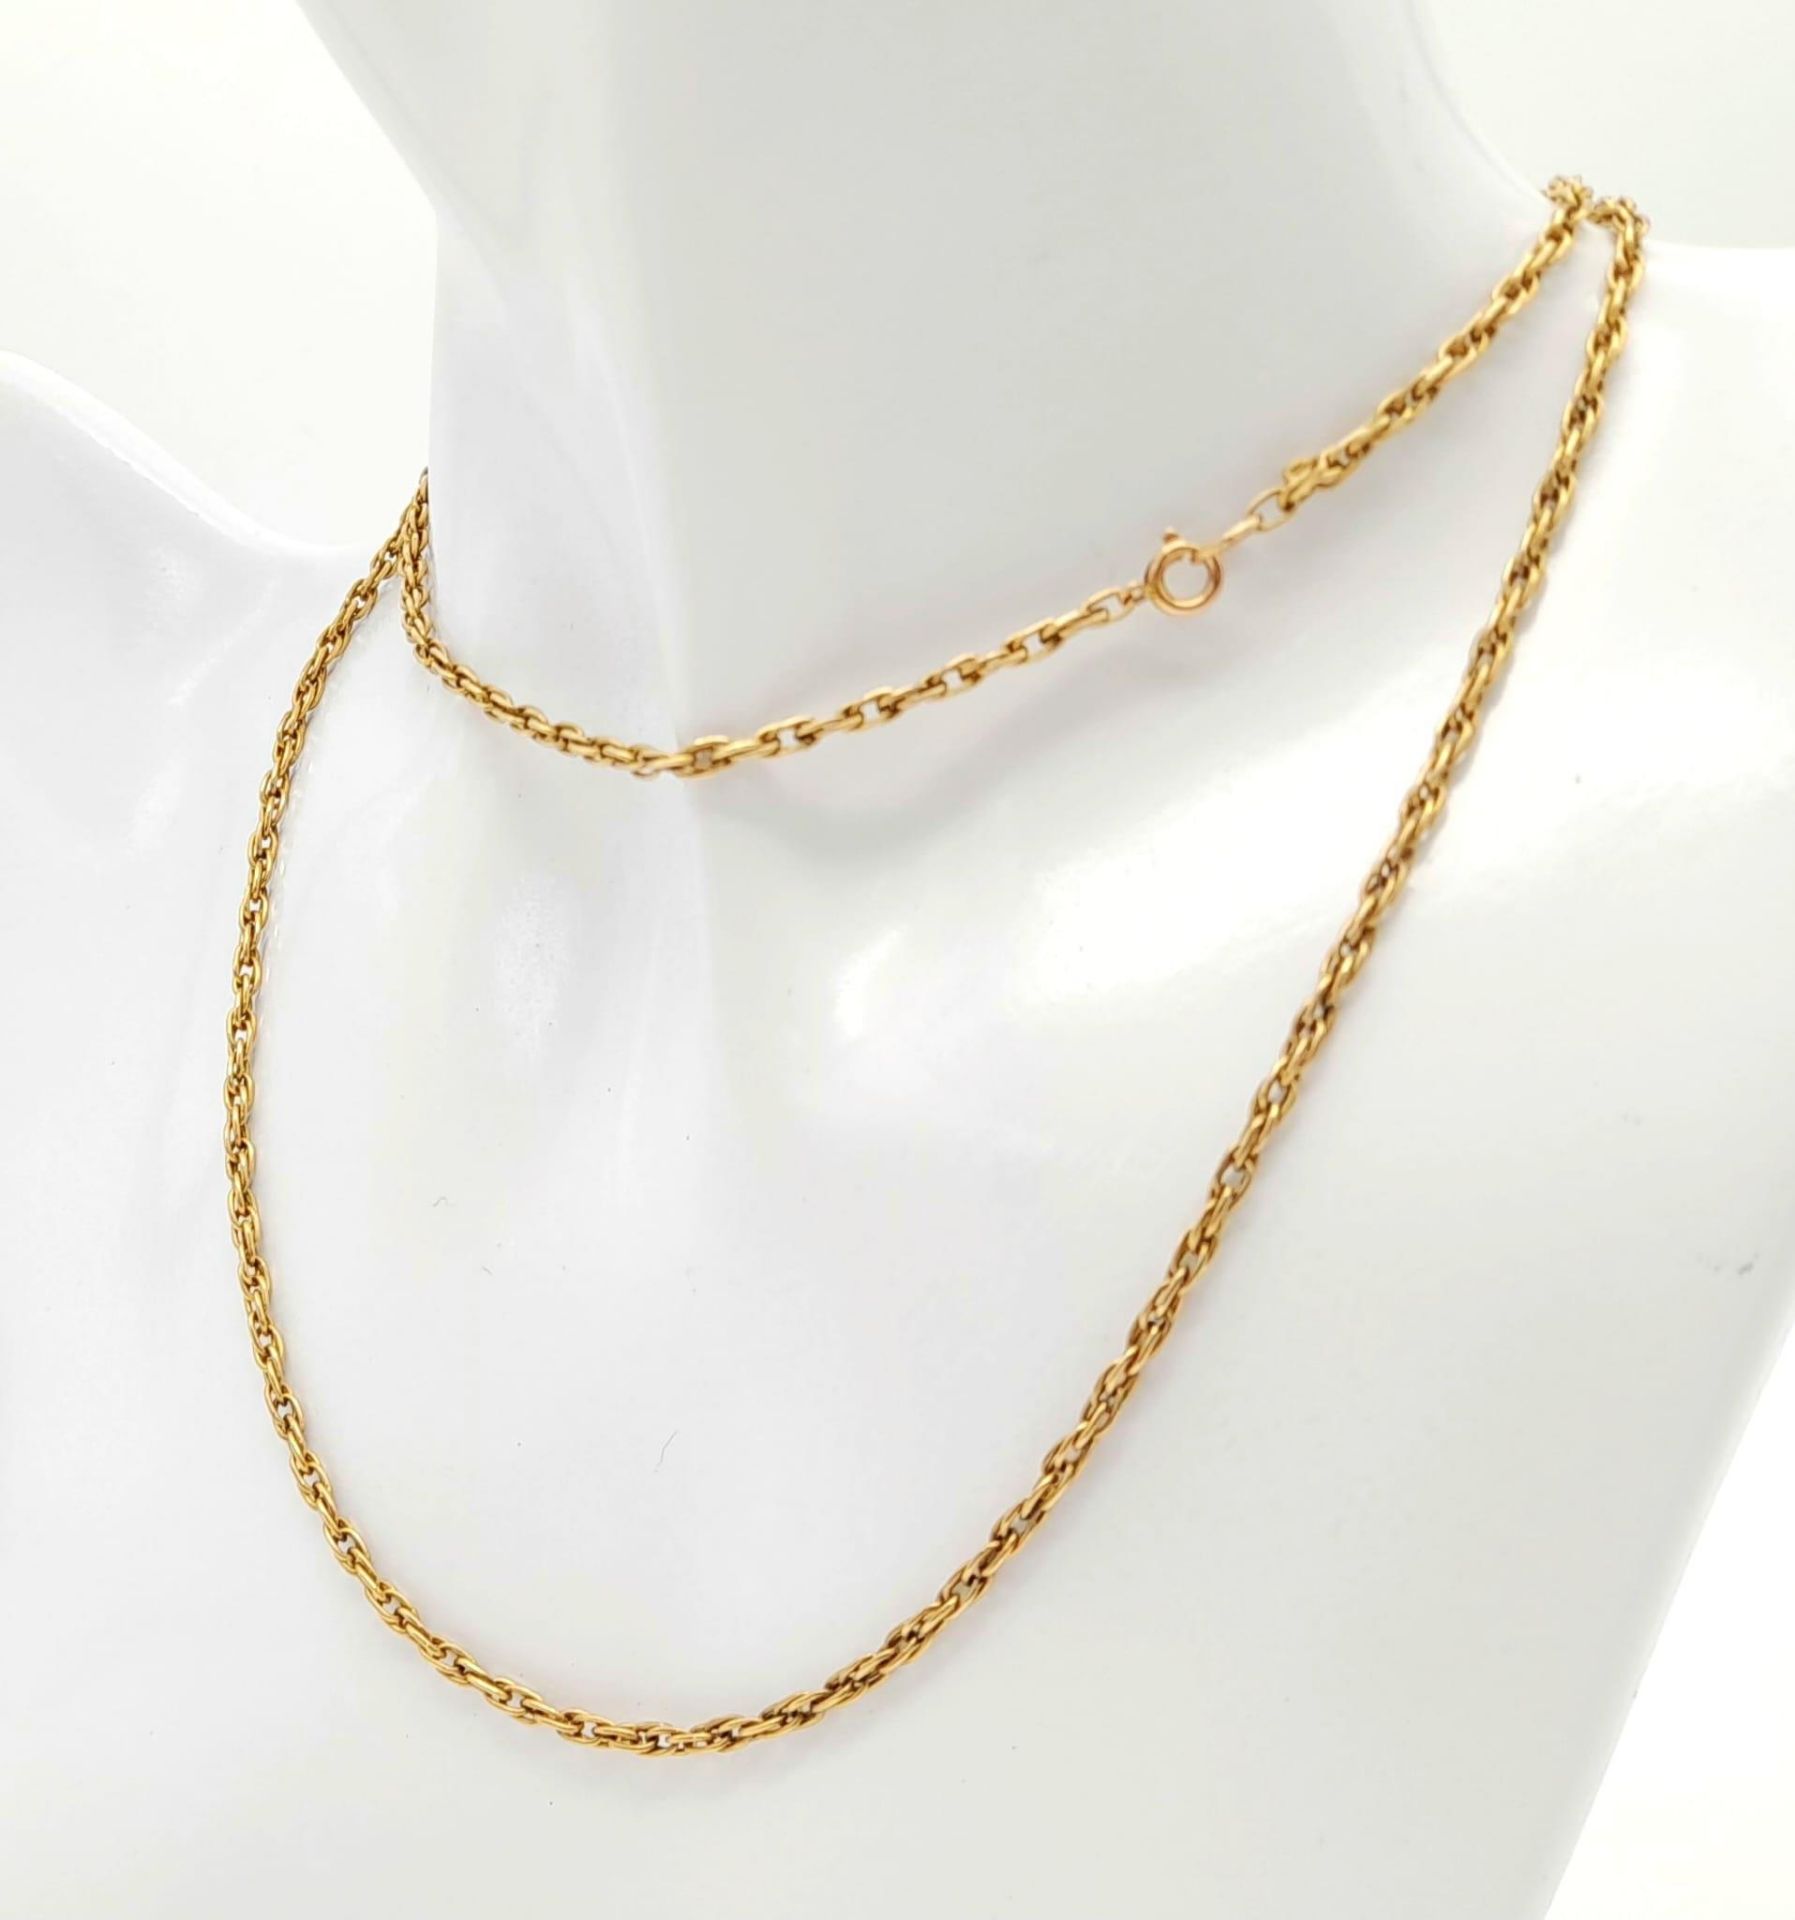 A Vintage 9K Yellow Gold Oval Link Chain/Necklace. 60cm length. 8.7g weight. - Image 2 of 5